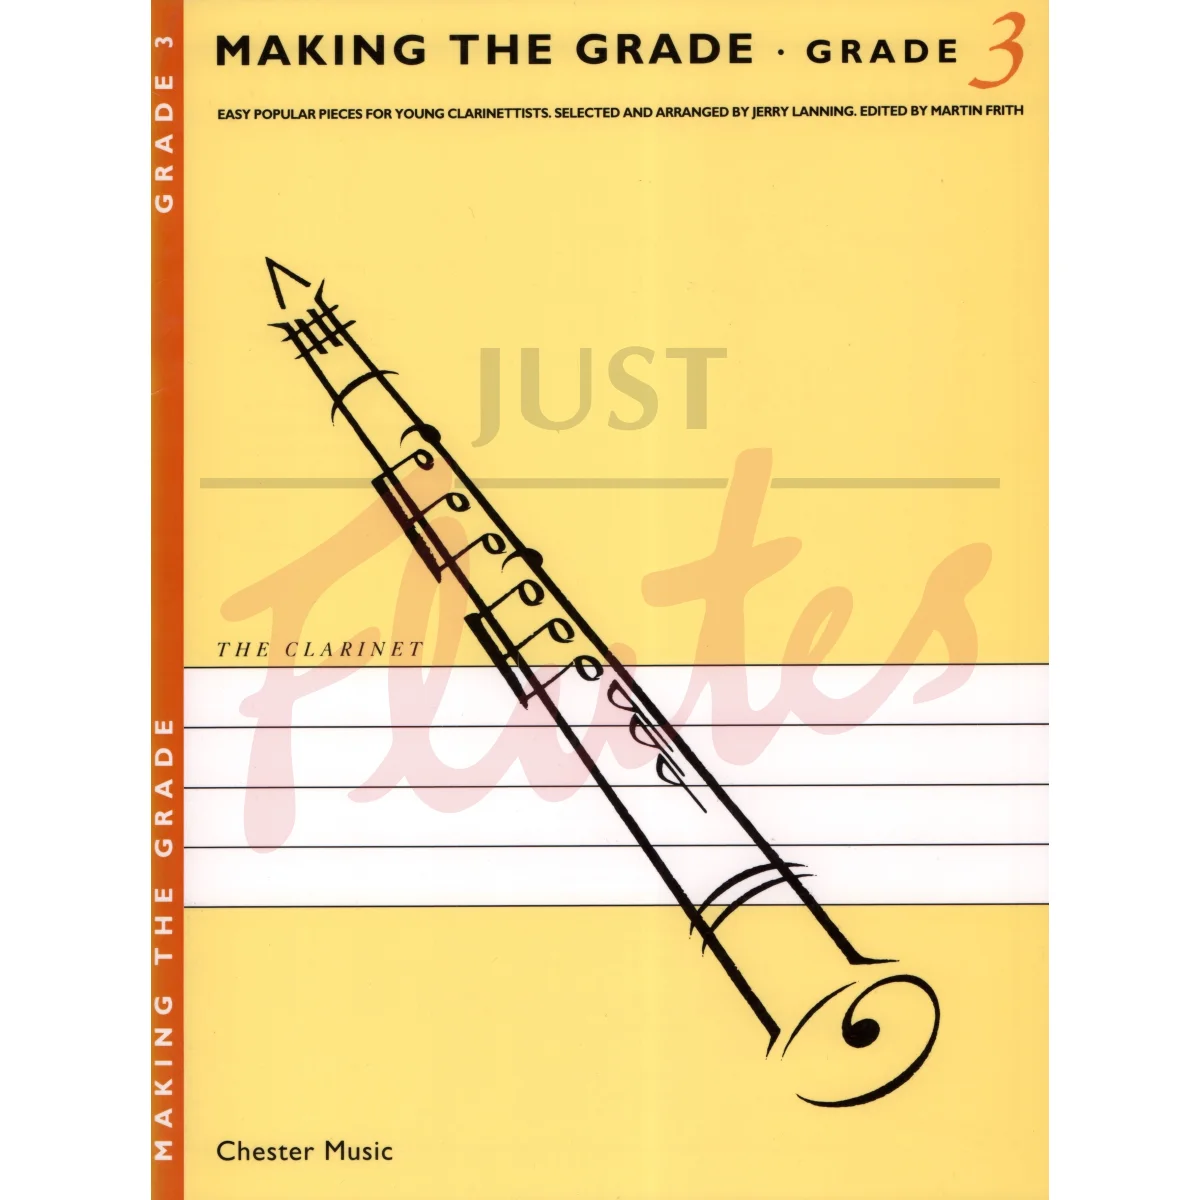 Making the Grade - Grade 3 for Clarinet